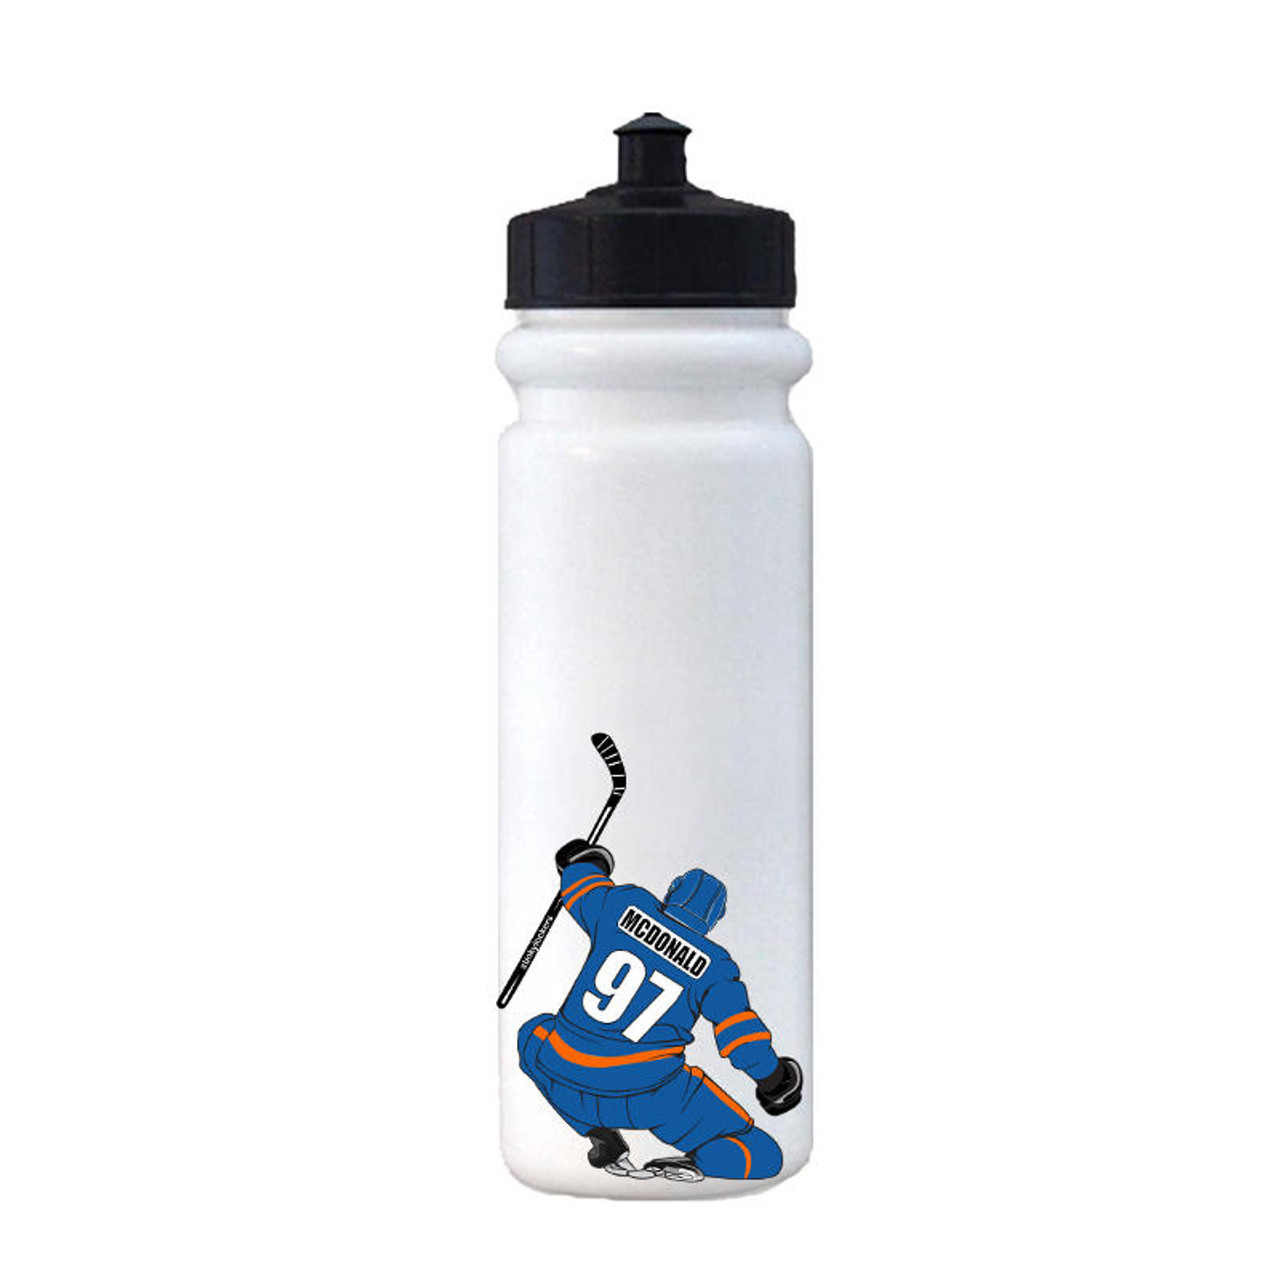 3 Pack Celly Slide Sticker for your Water Bottle or Cell Phone or Laptop or Thermal Mug and More